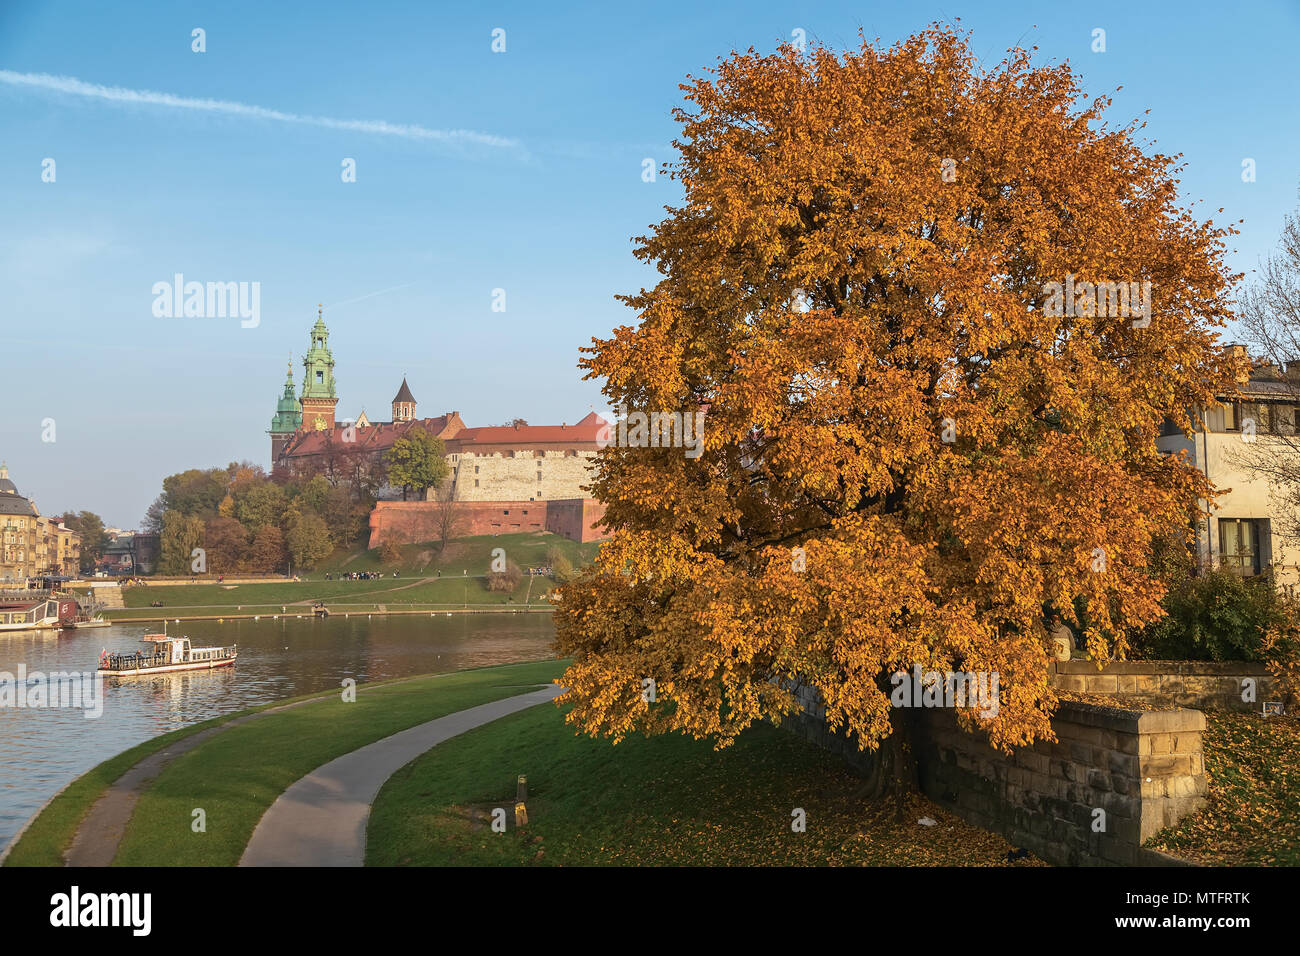 Quay of the river Wisla, the Royal Palace on Wawel Hill, and a motley tree in the foreground. Krakow. Poland Stock Photo